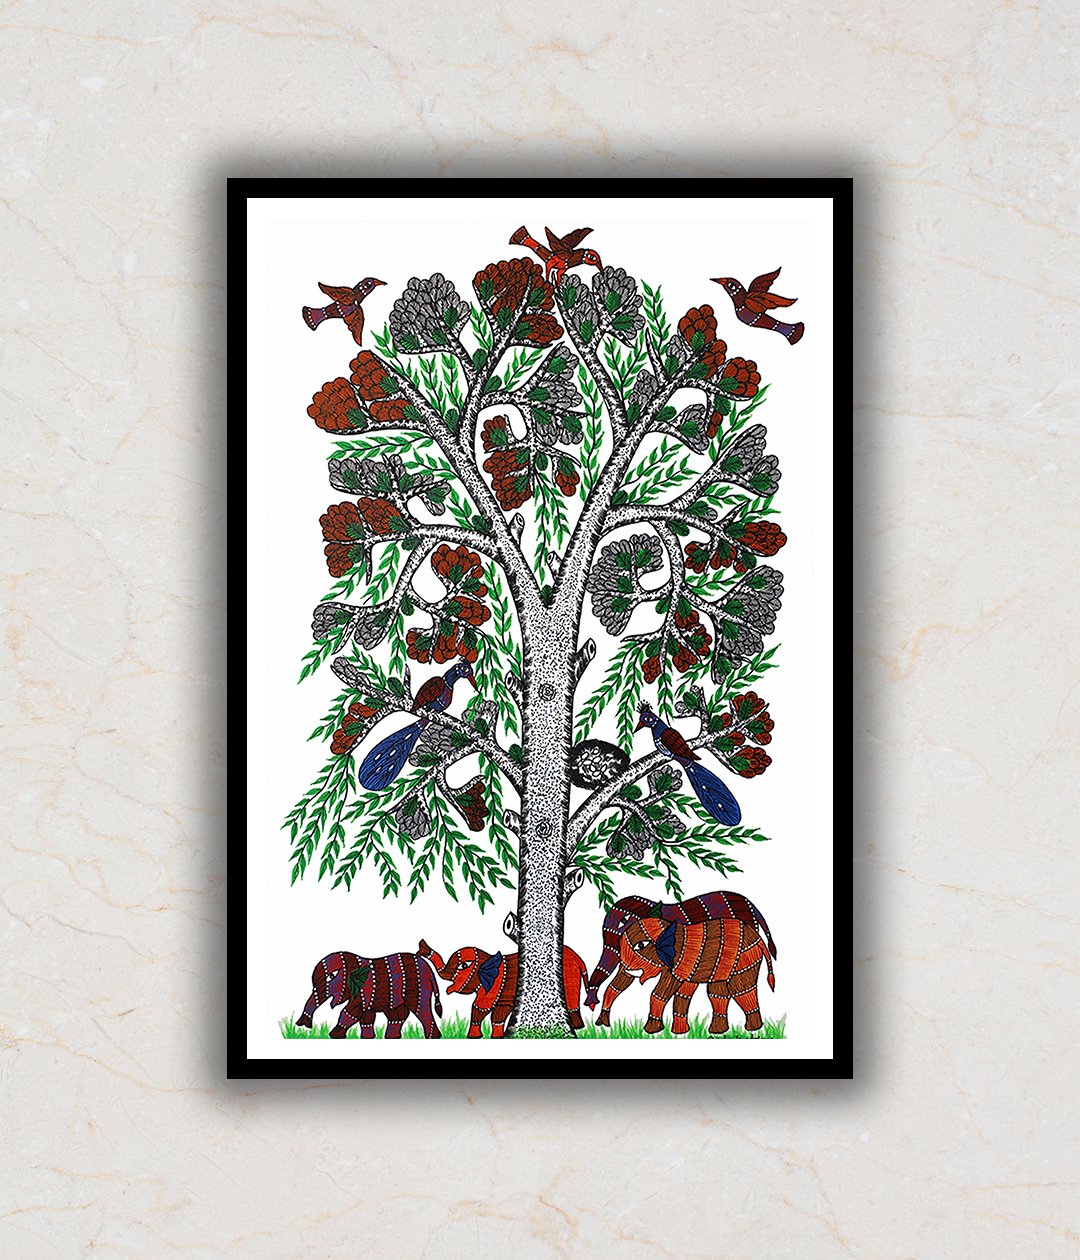 Elephants and Tree Gond Art Painting For Home Wall Art Decor 1